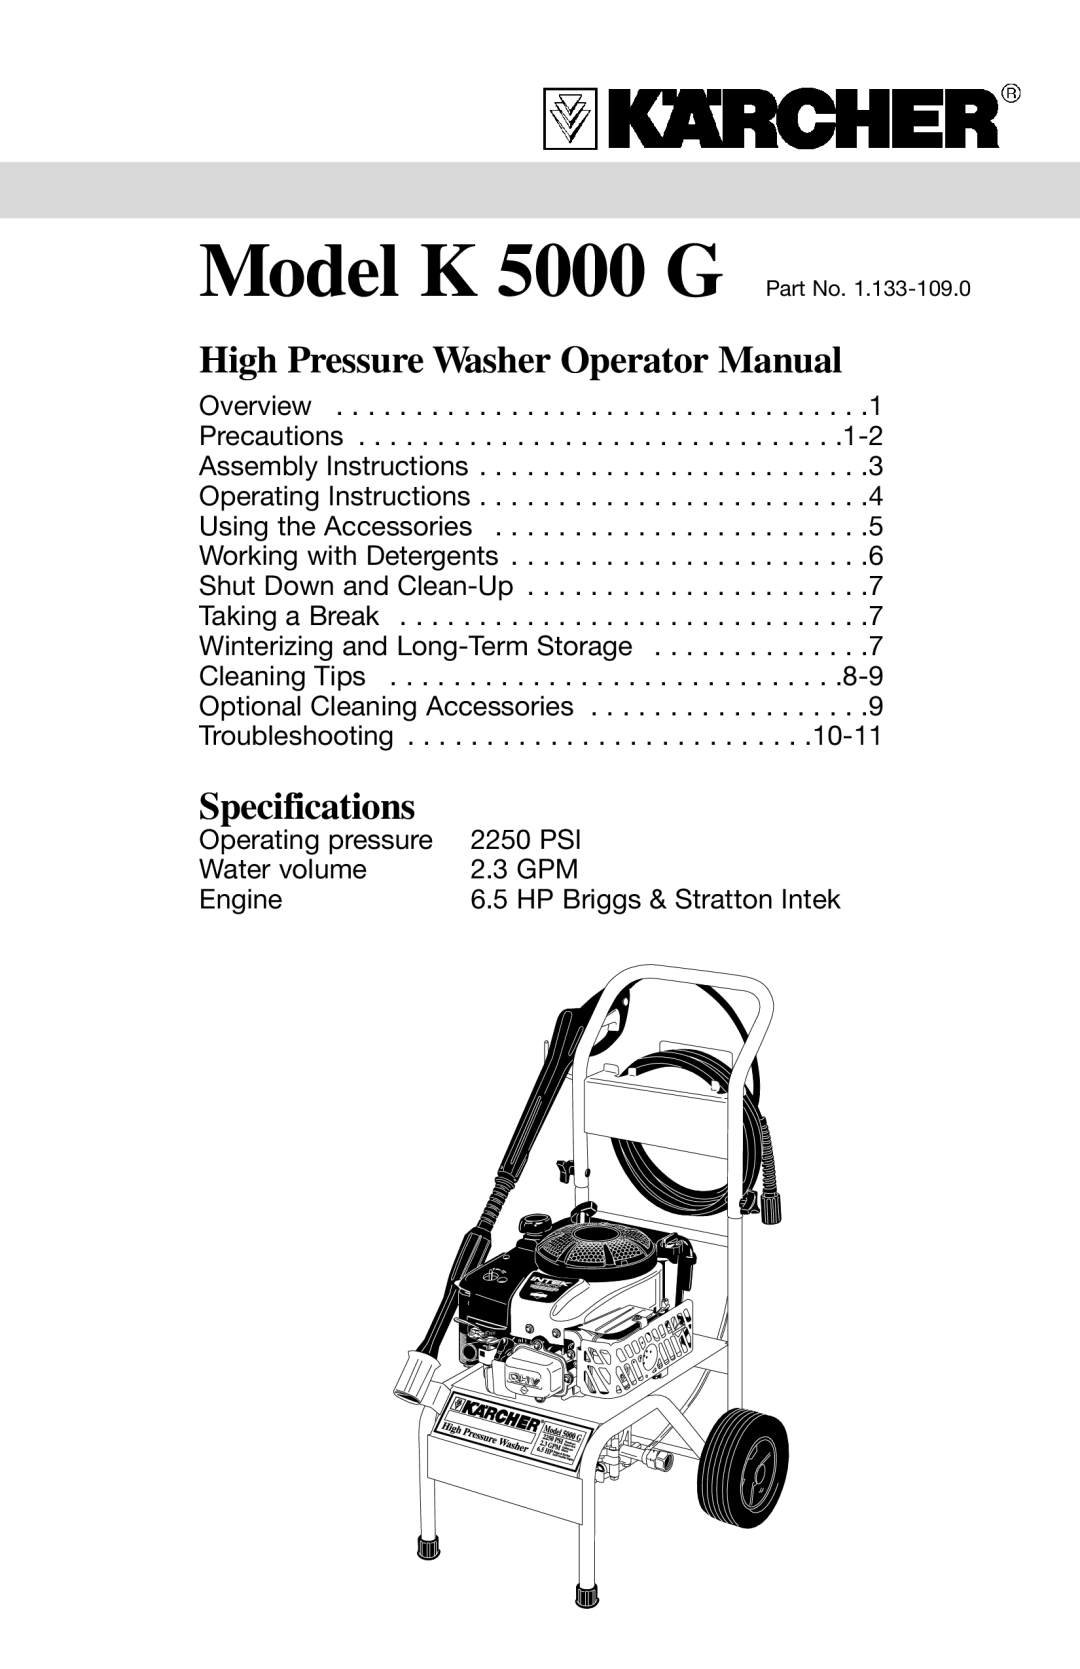 Karcher K 5000 G specifications High Pressure Washer Operator Manual, Specifications 